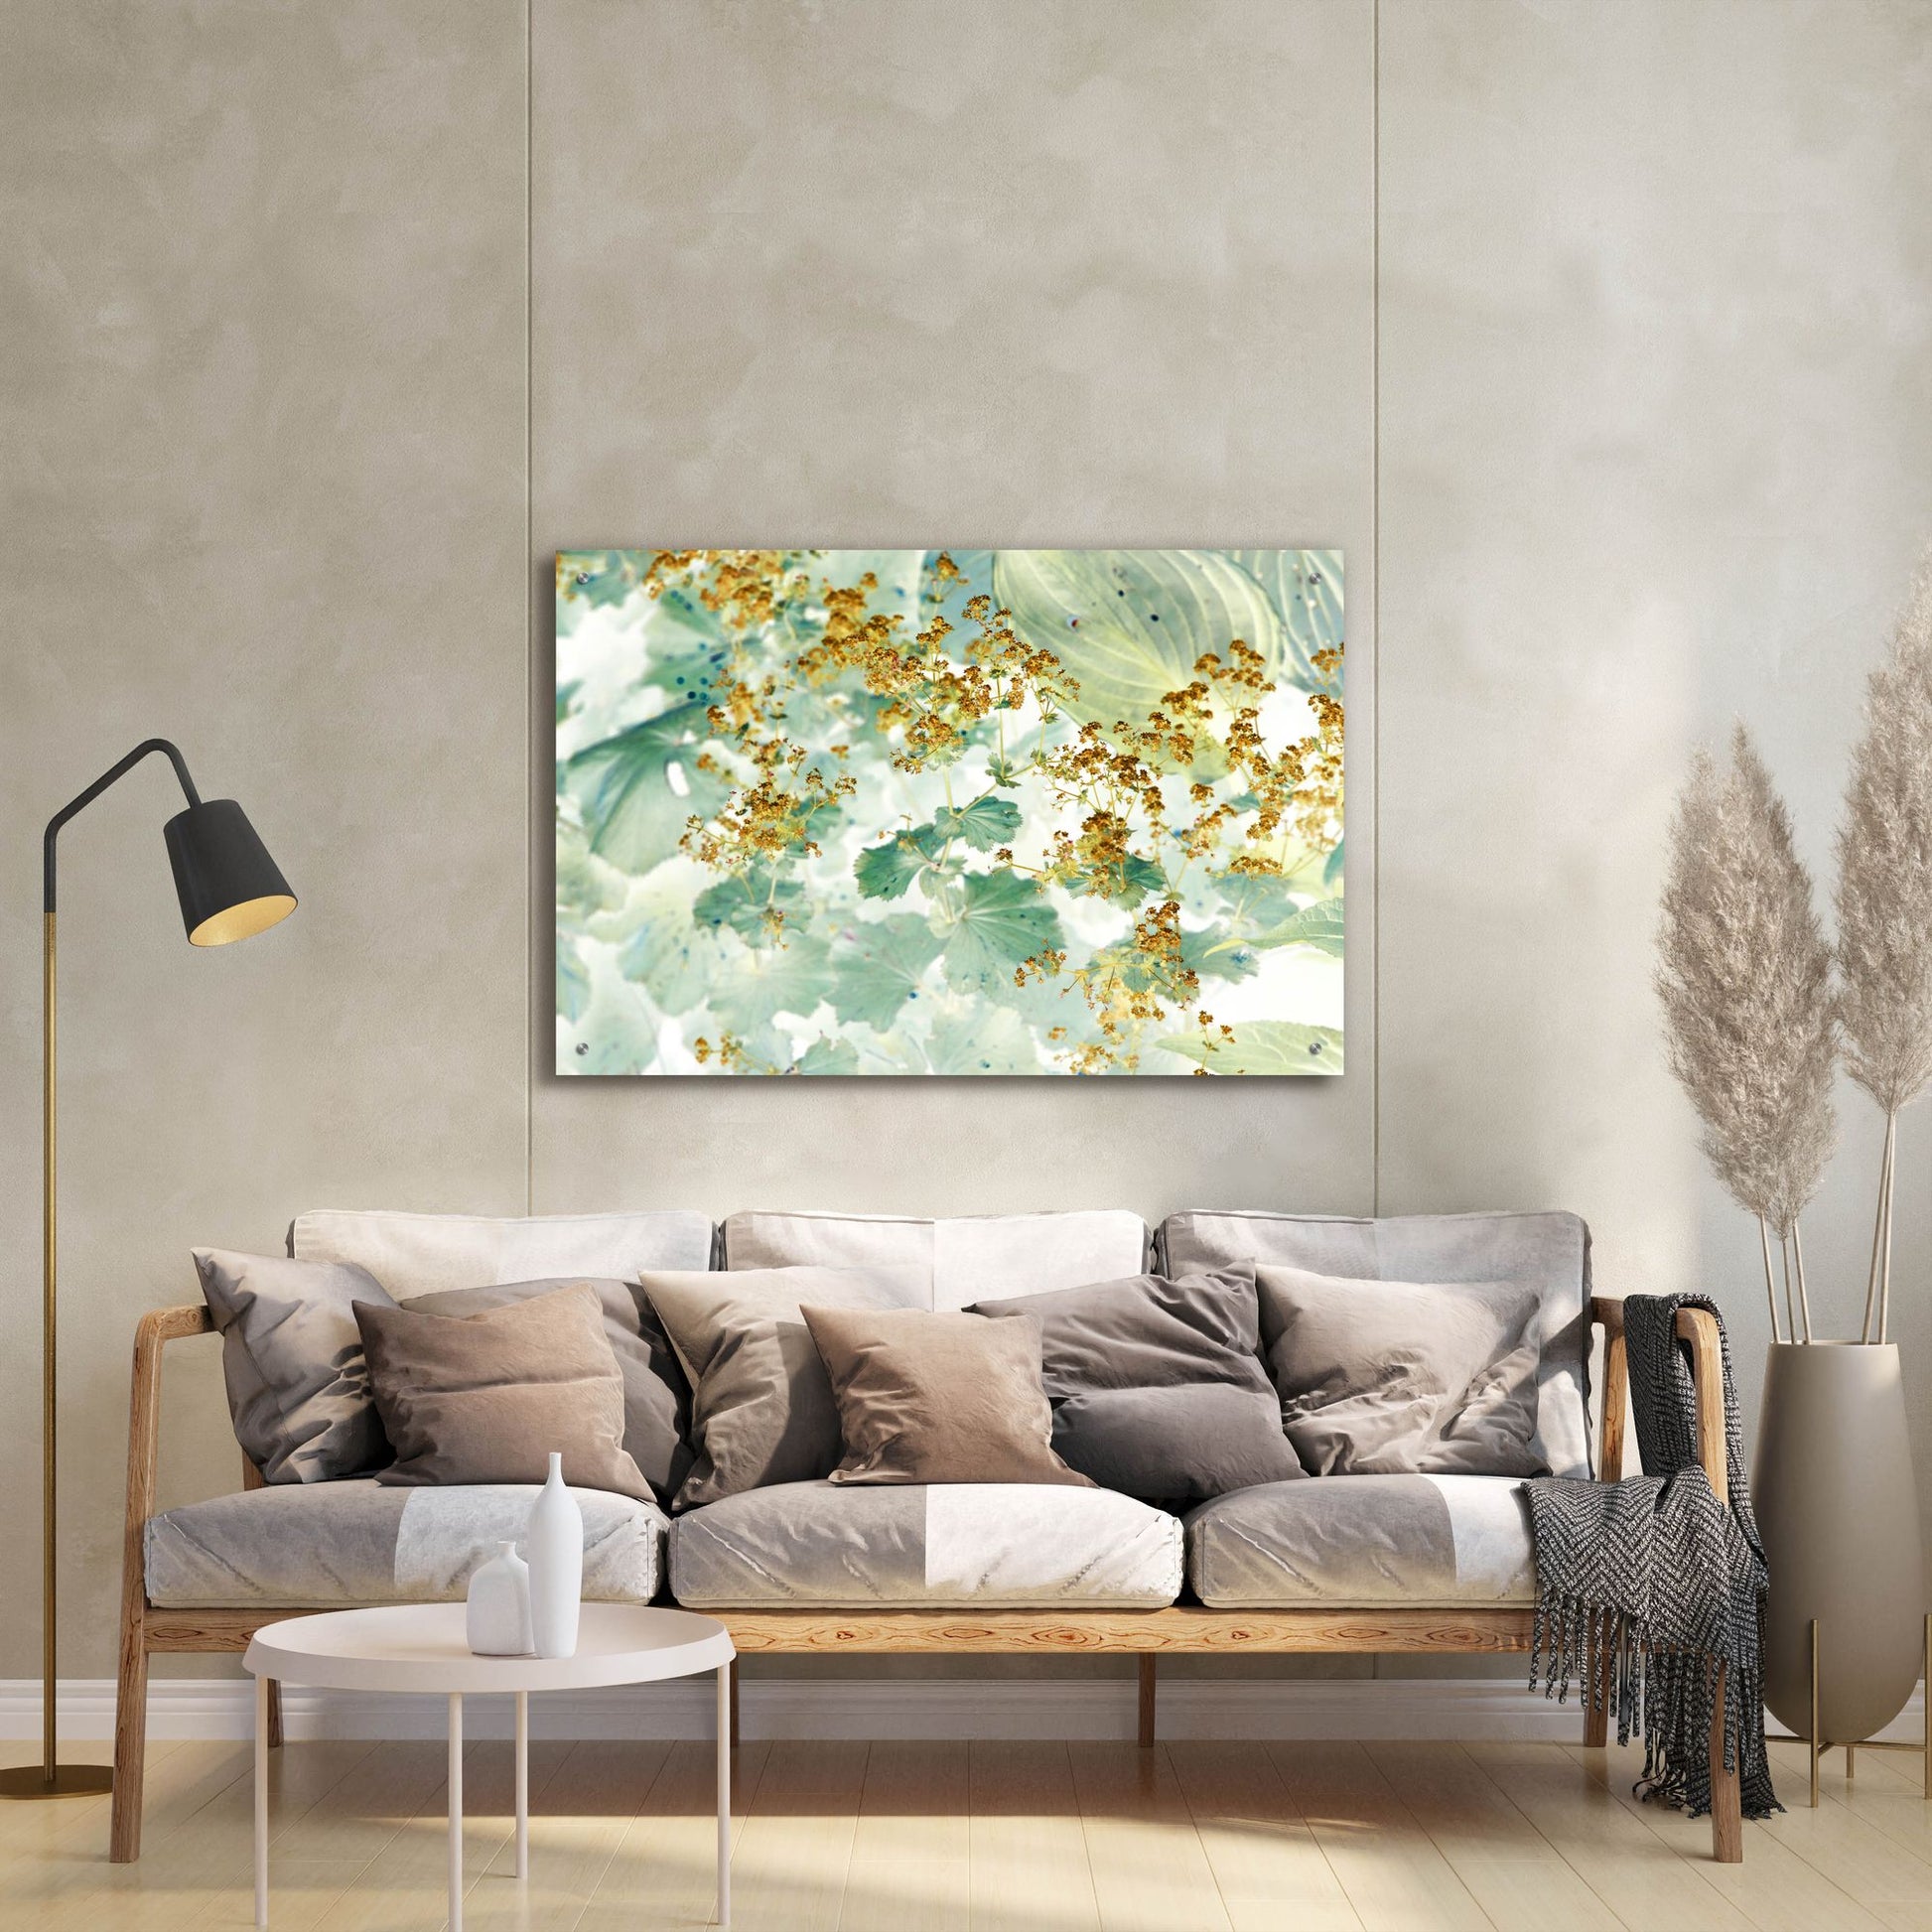 Epic Art ' Golden Lady's Mantle' by Judy Stalus, Acrylic Glass Wall Art,36x24